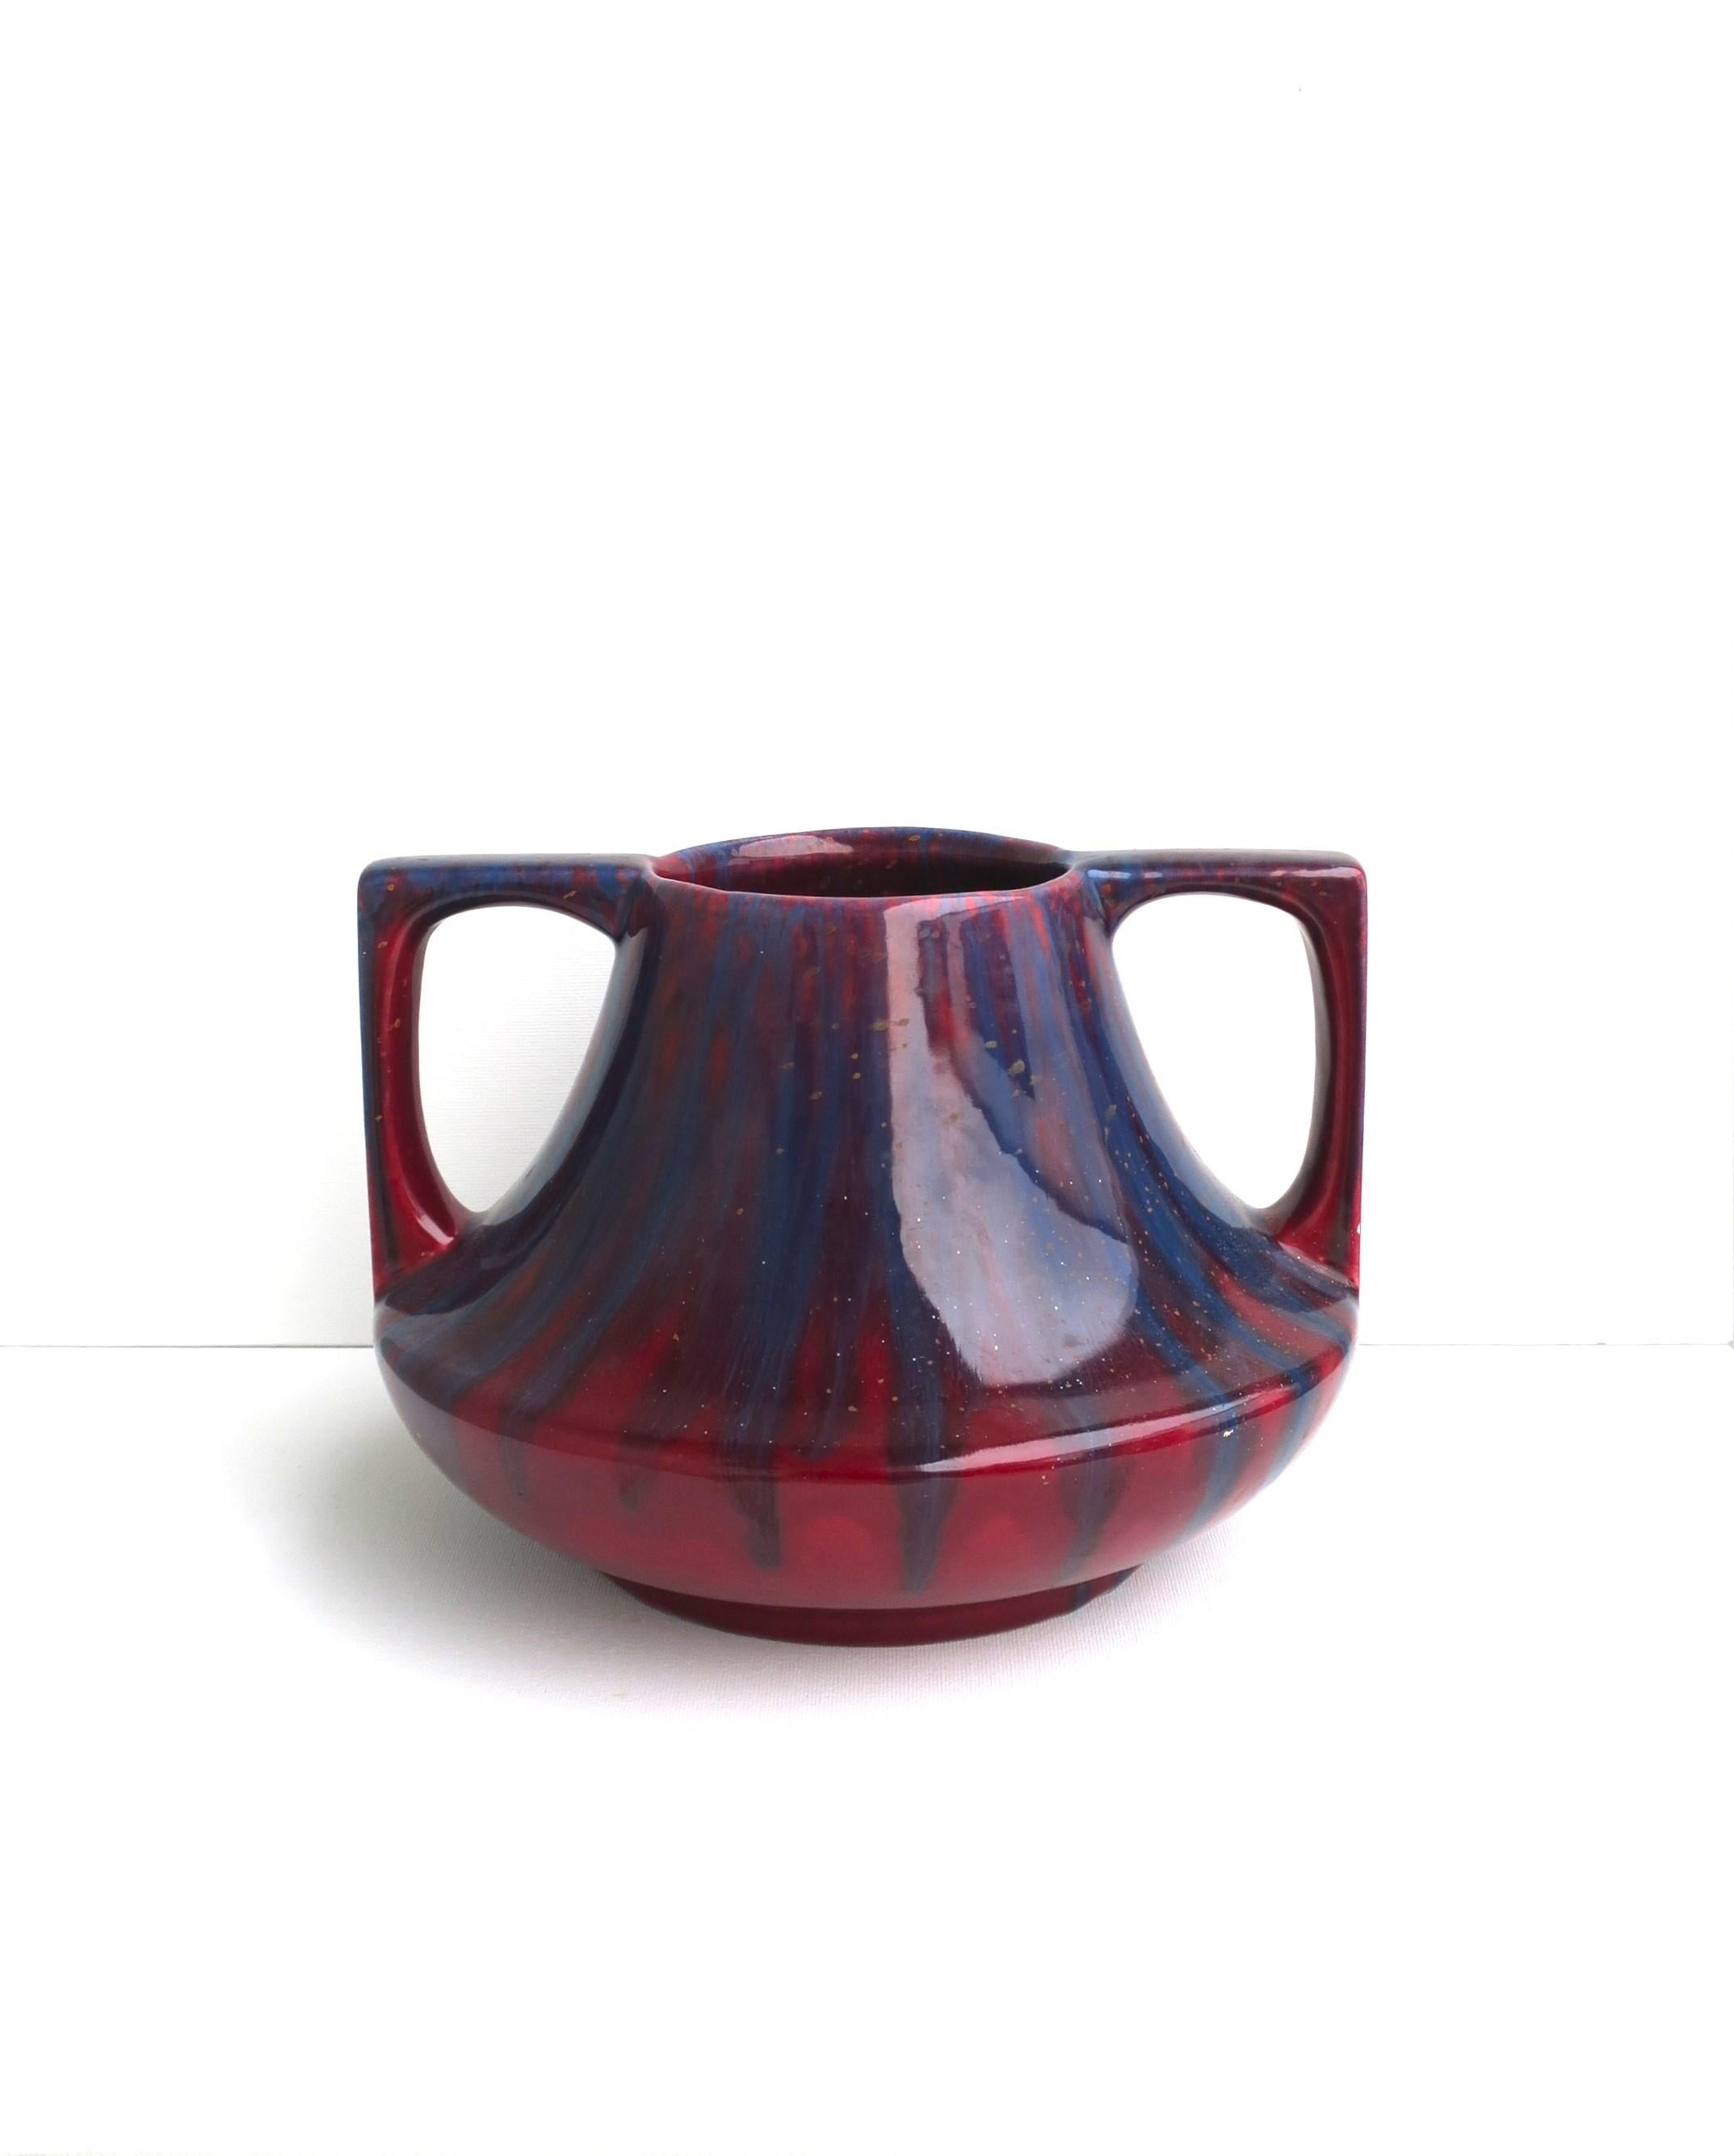 A red burgundy and blue ceramic drip glazed amphora vase, circa mid-20th century. A beautiful standalone piece for a shelf, credenza/sideboard, etc., with rich red burgundy and blue hues. Dimensions: 8